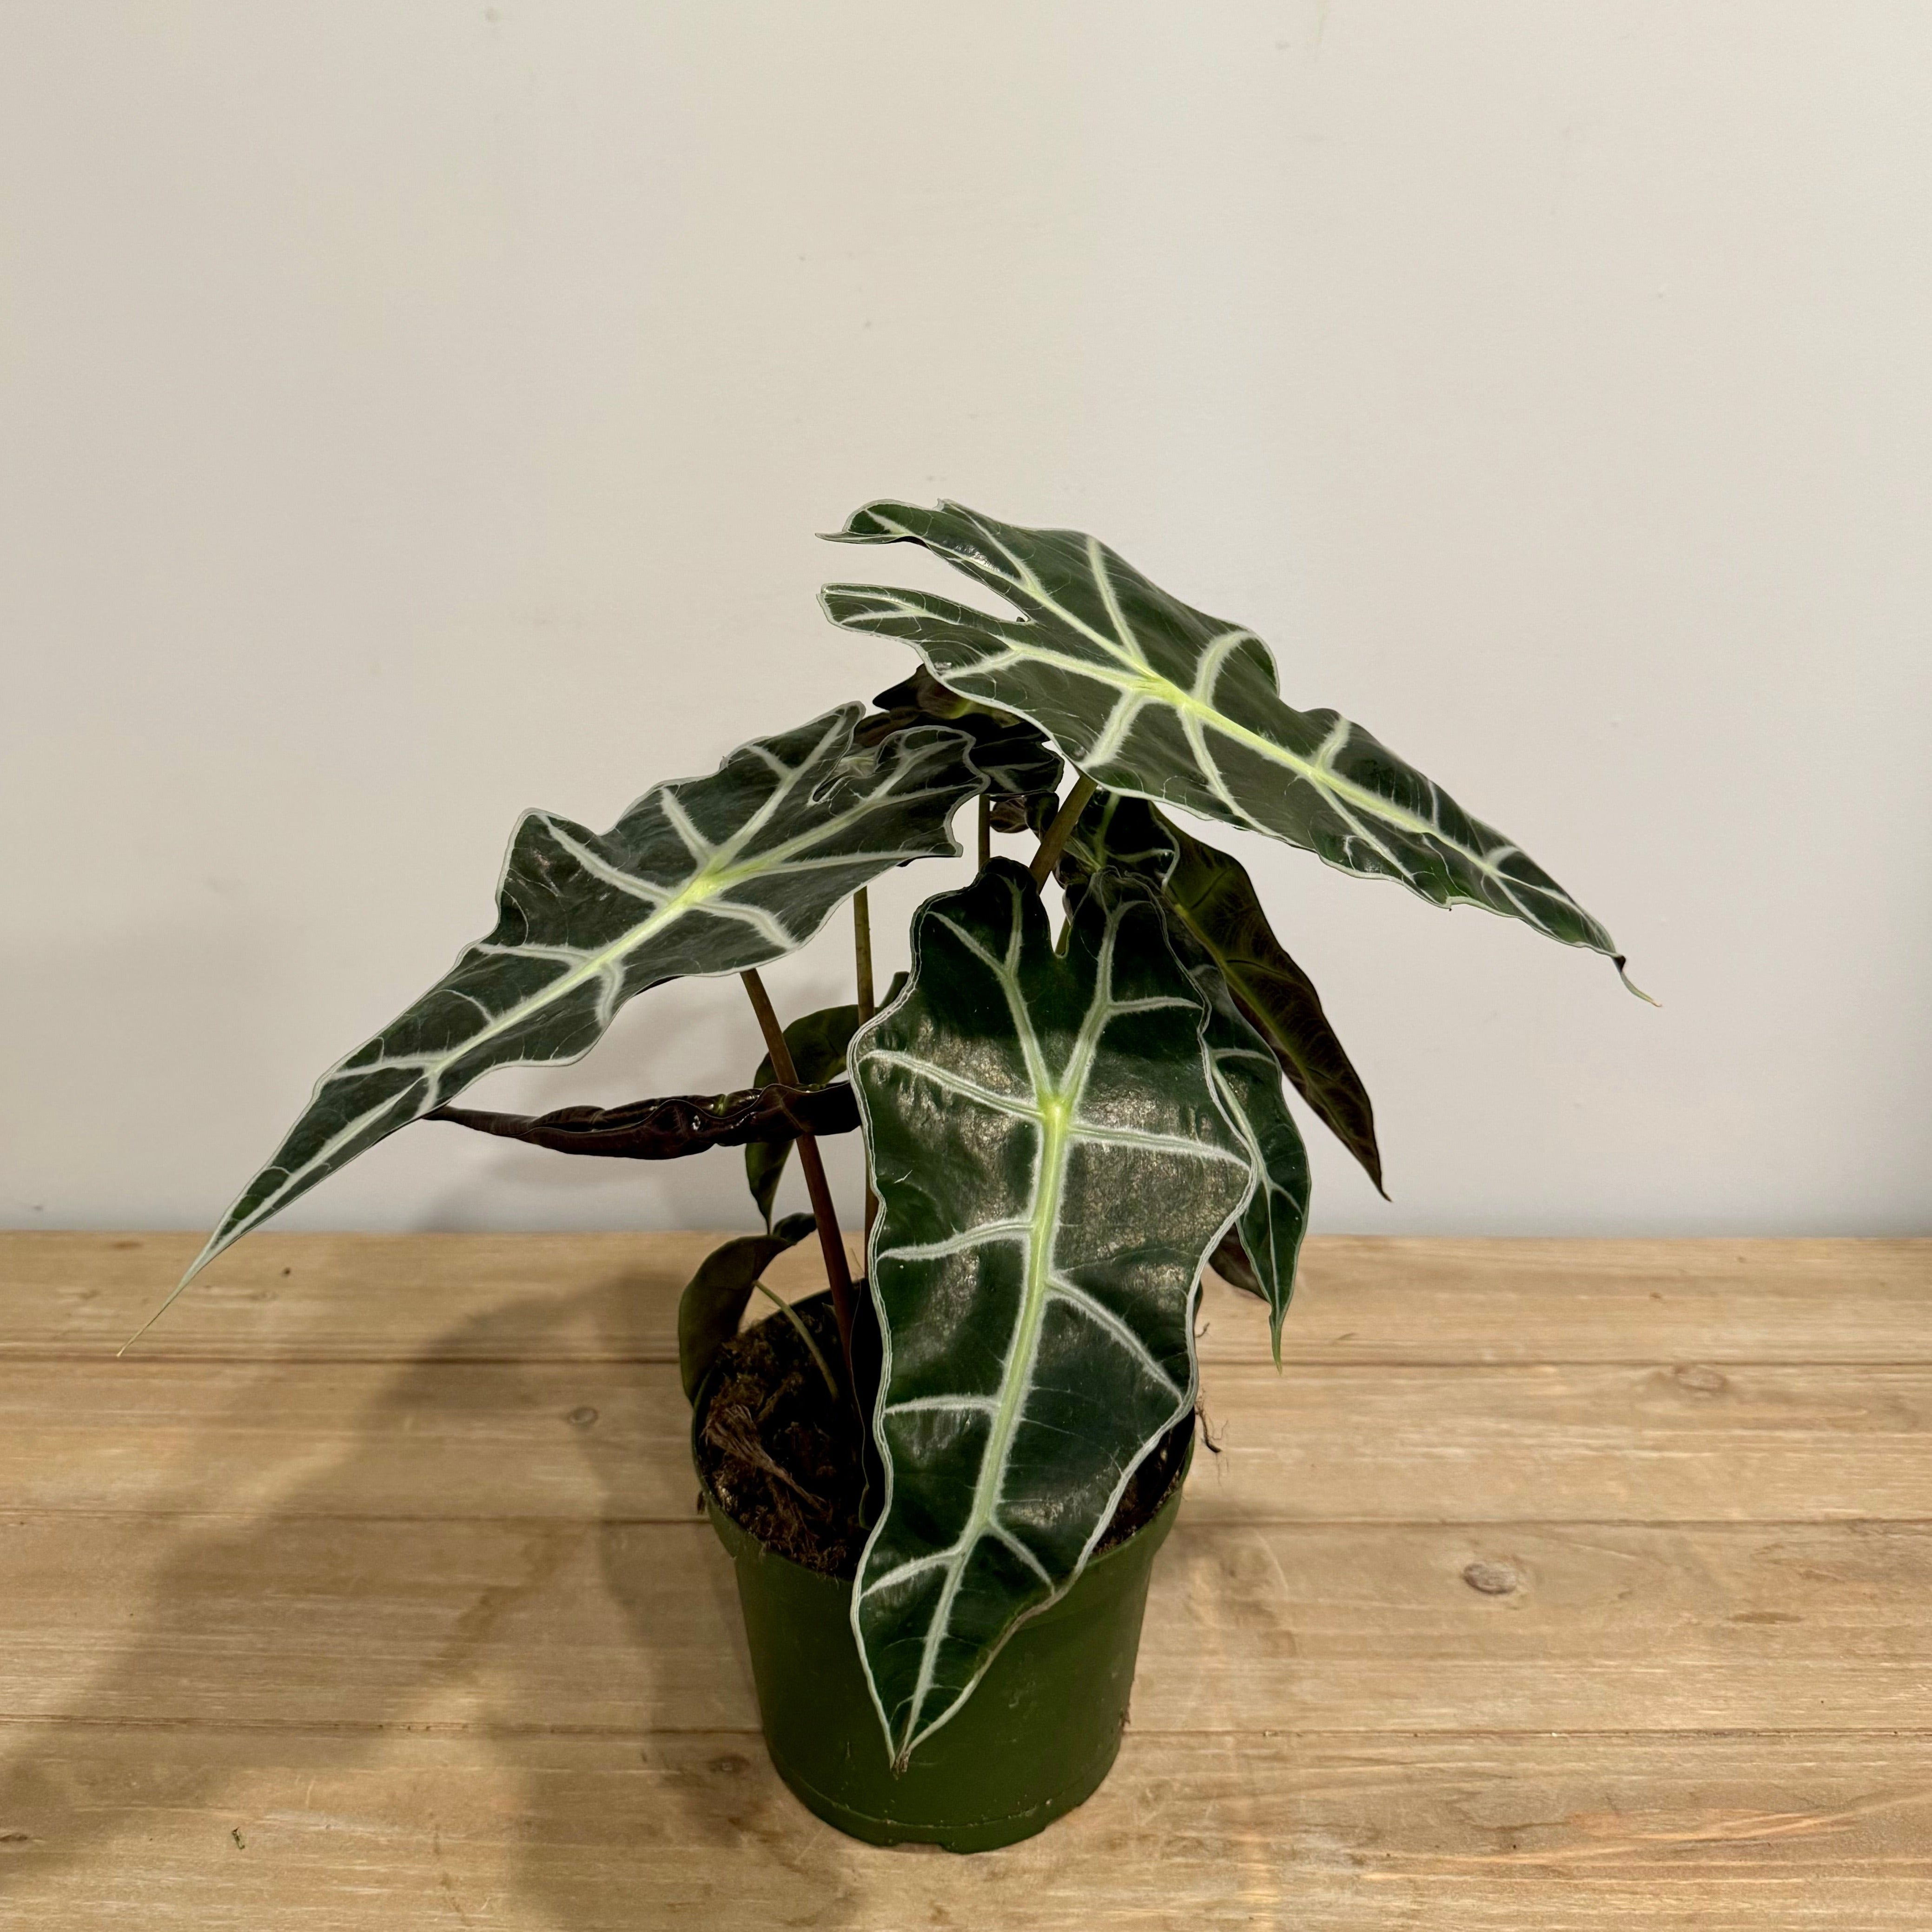 Alocasia Polly or African Mask Houseplant